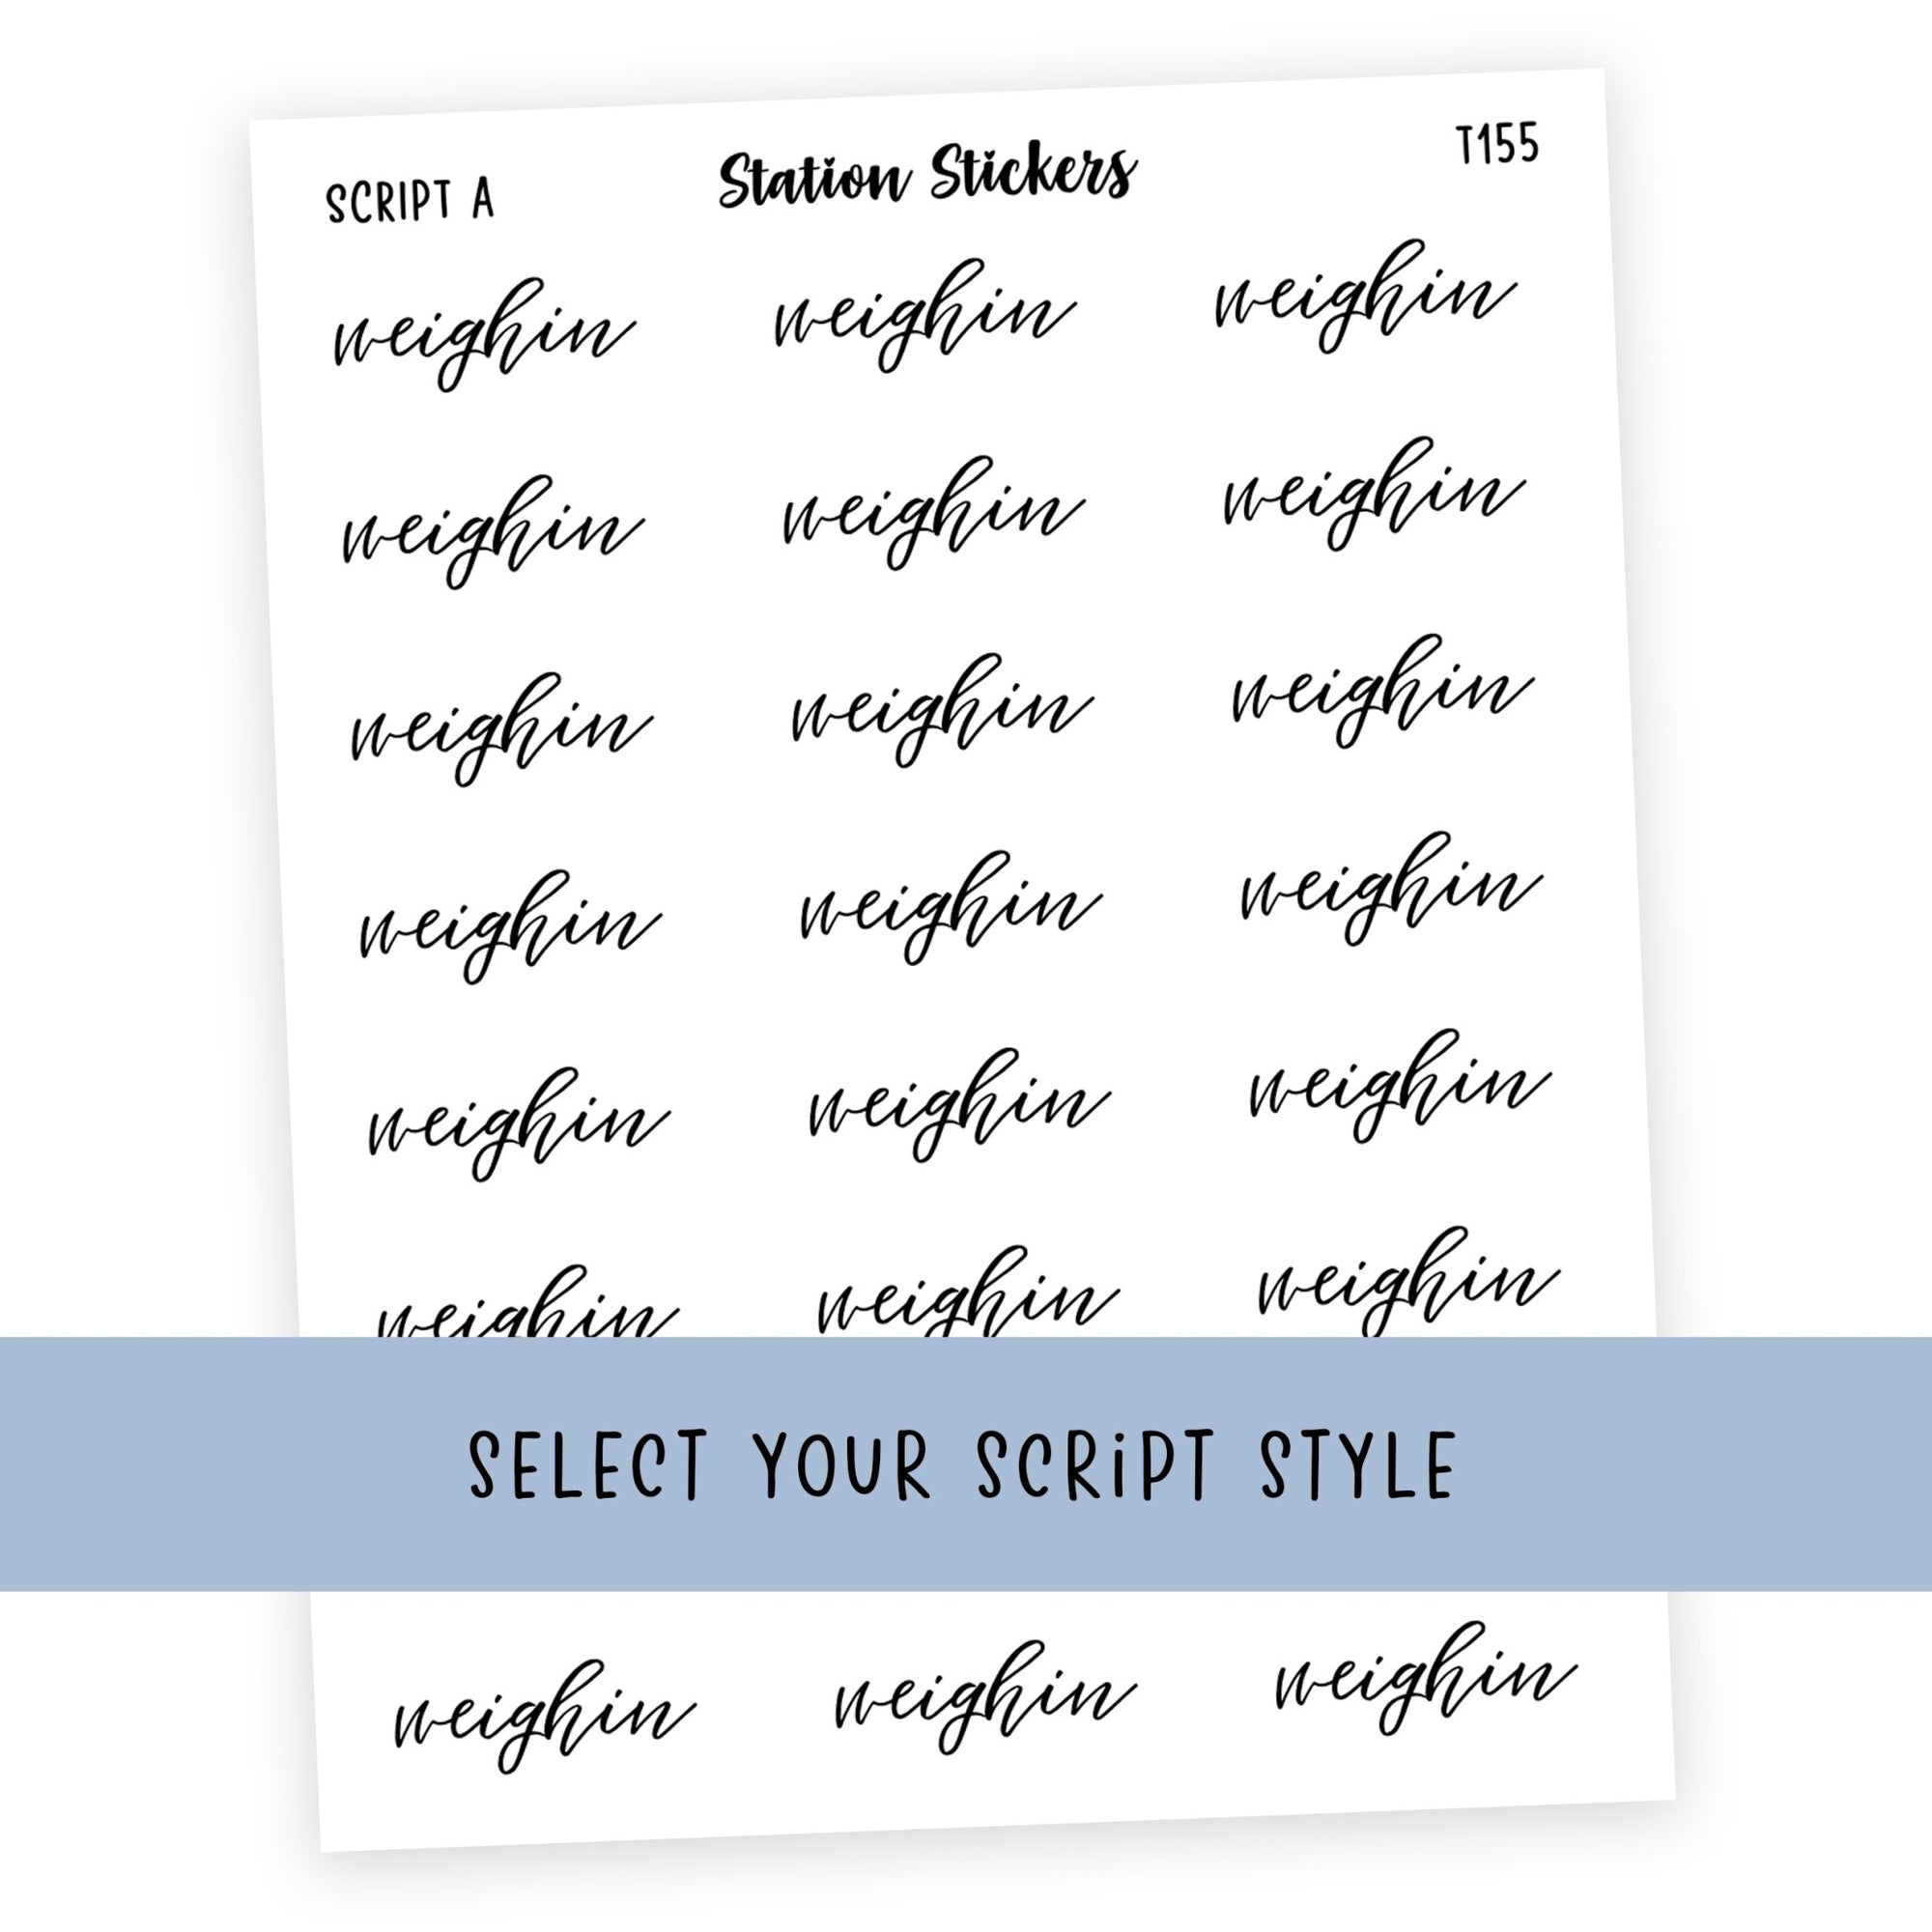 WEIGH IN • SCRIPTS - Station Stickers